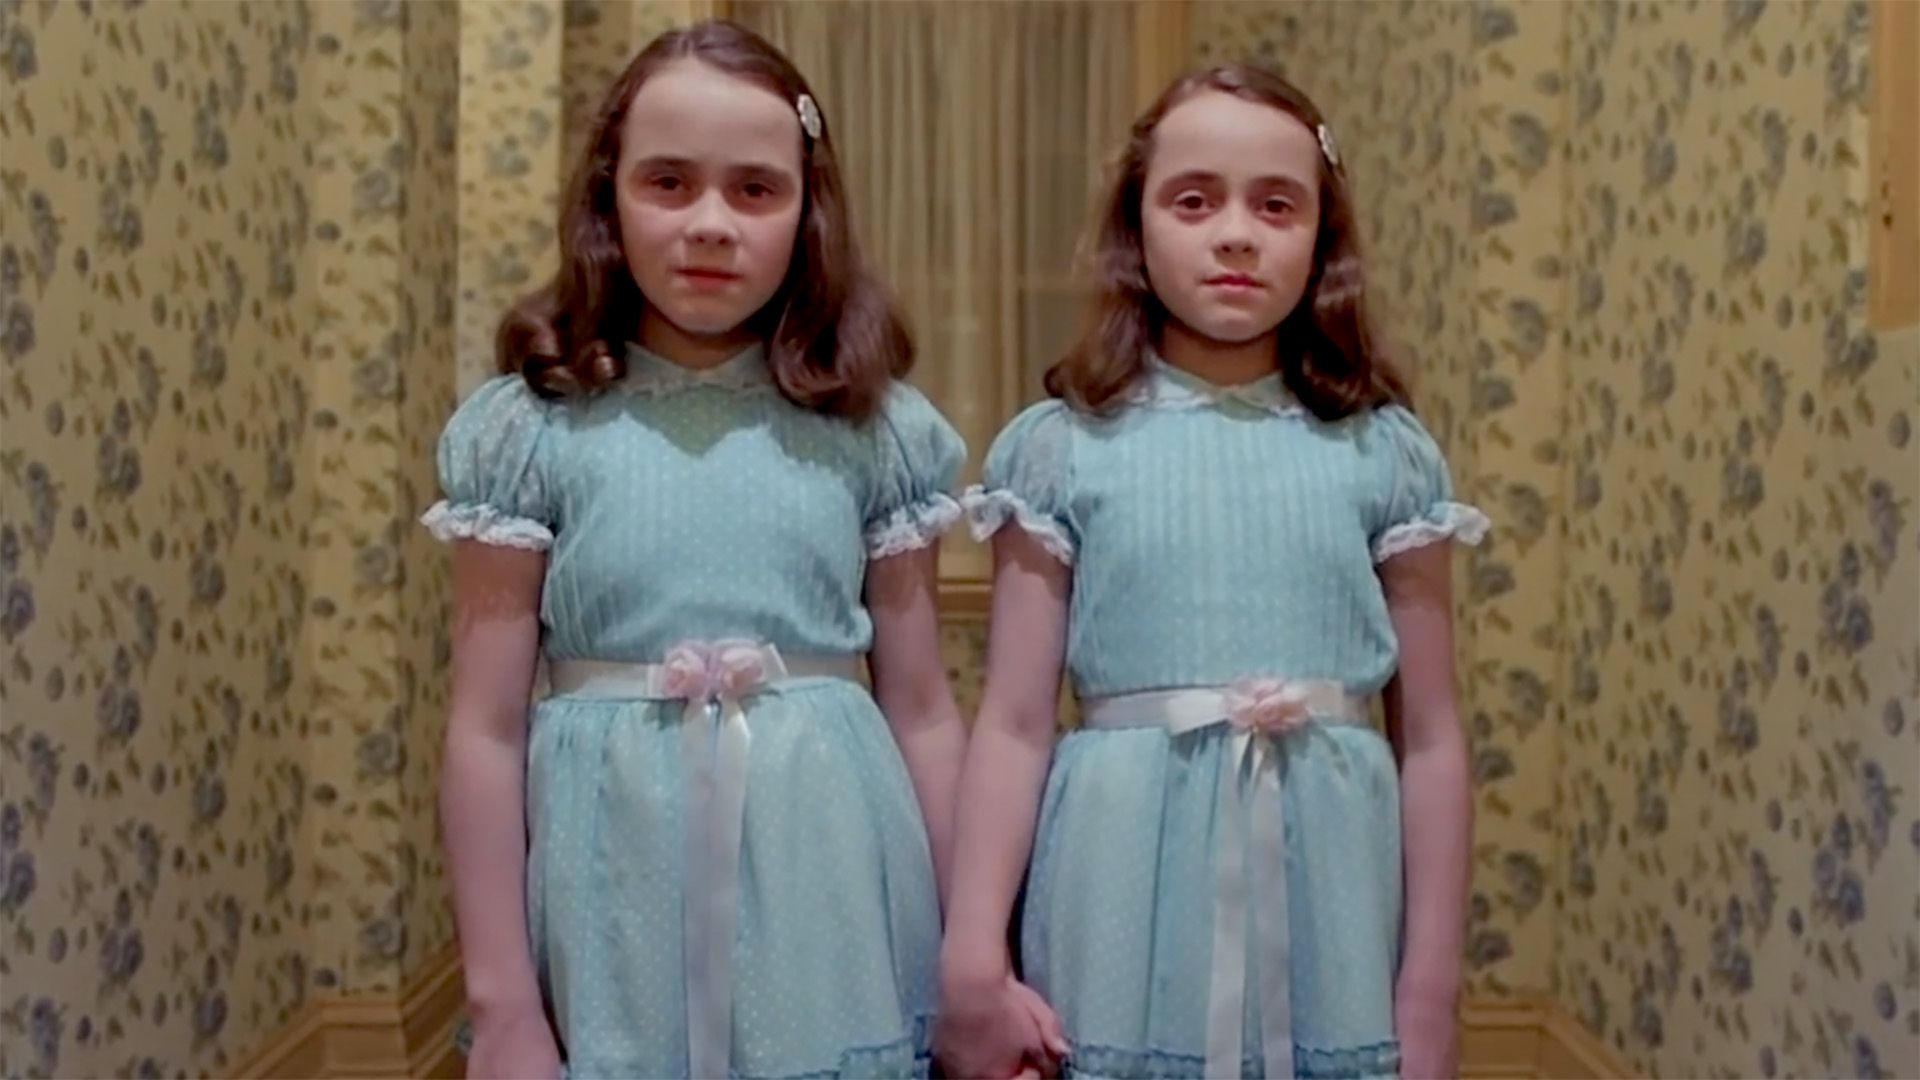 The Scariest Scene in Stanley Kubrick's The Shining